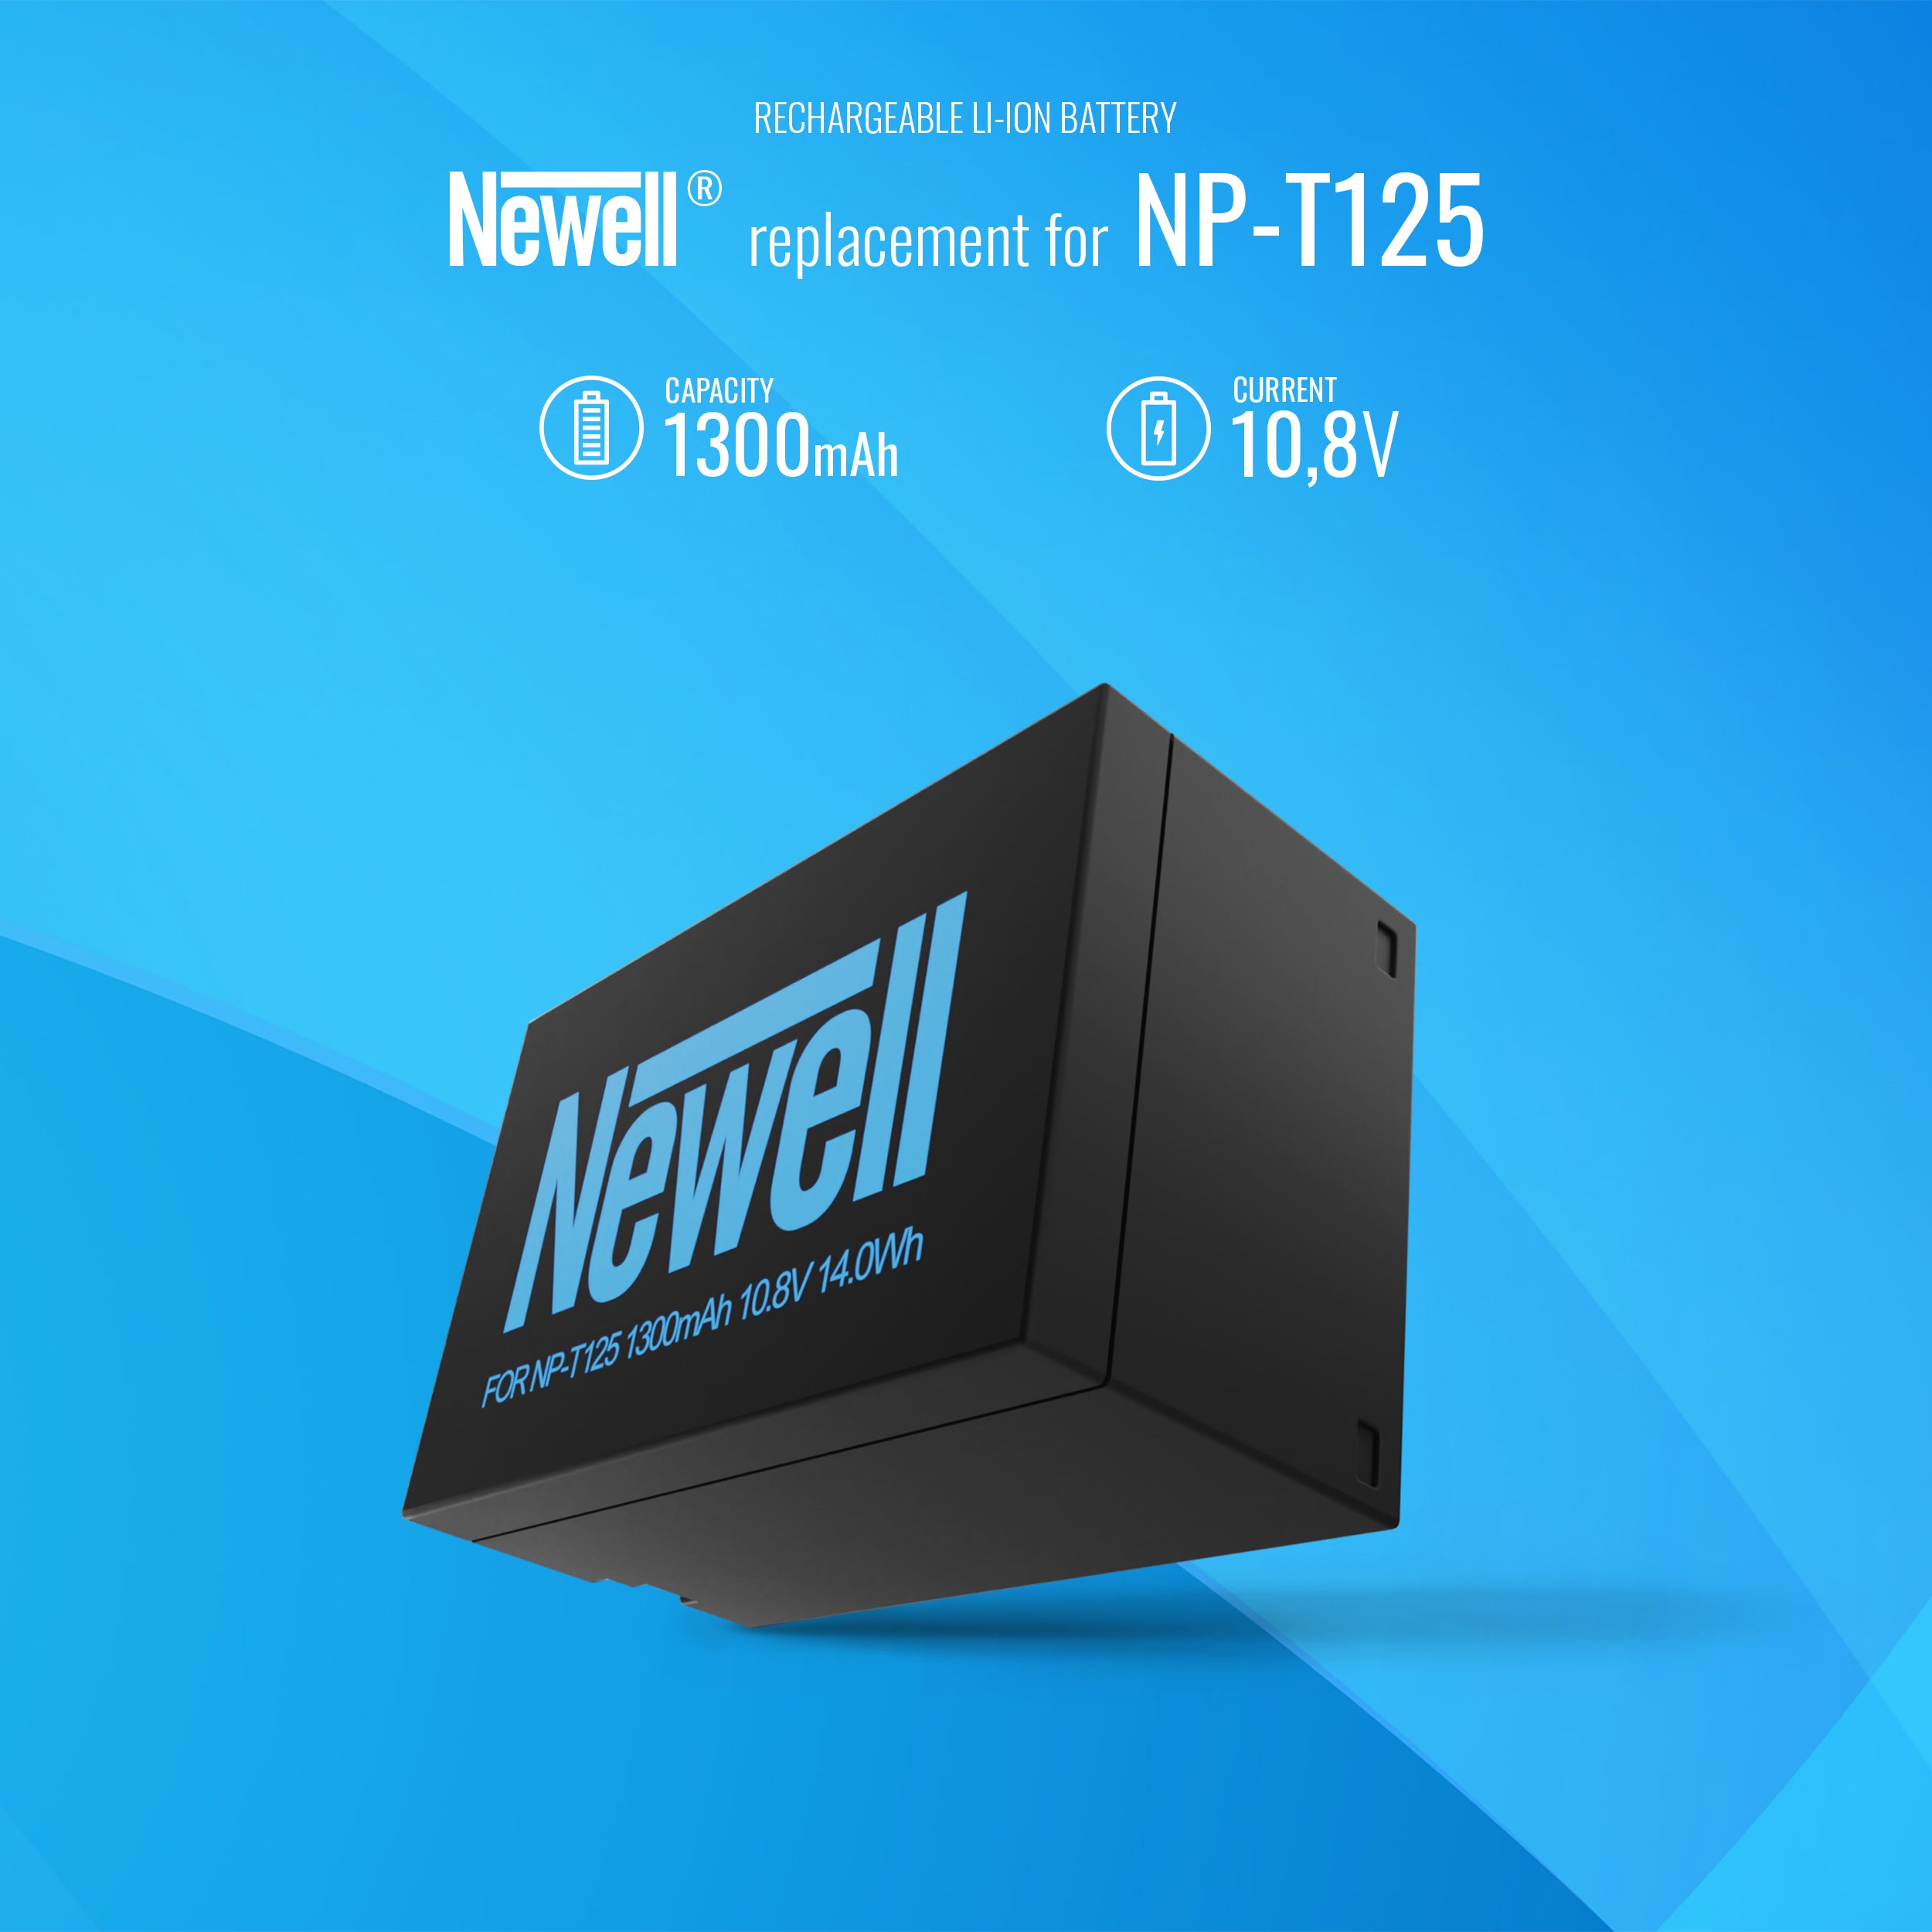 Batterie rechargeable Newell NP-T125